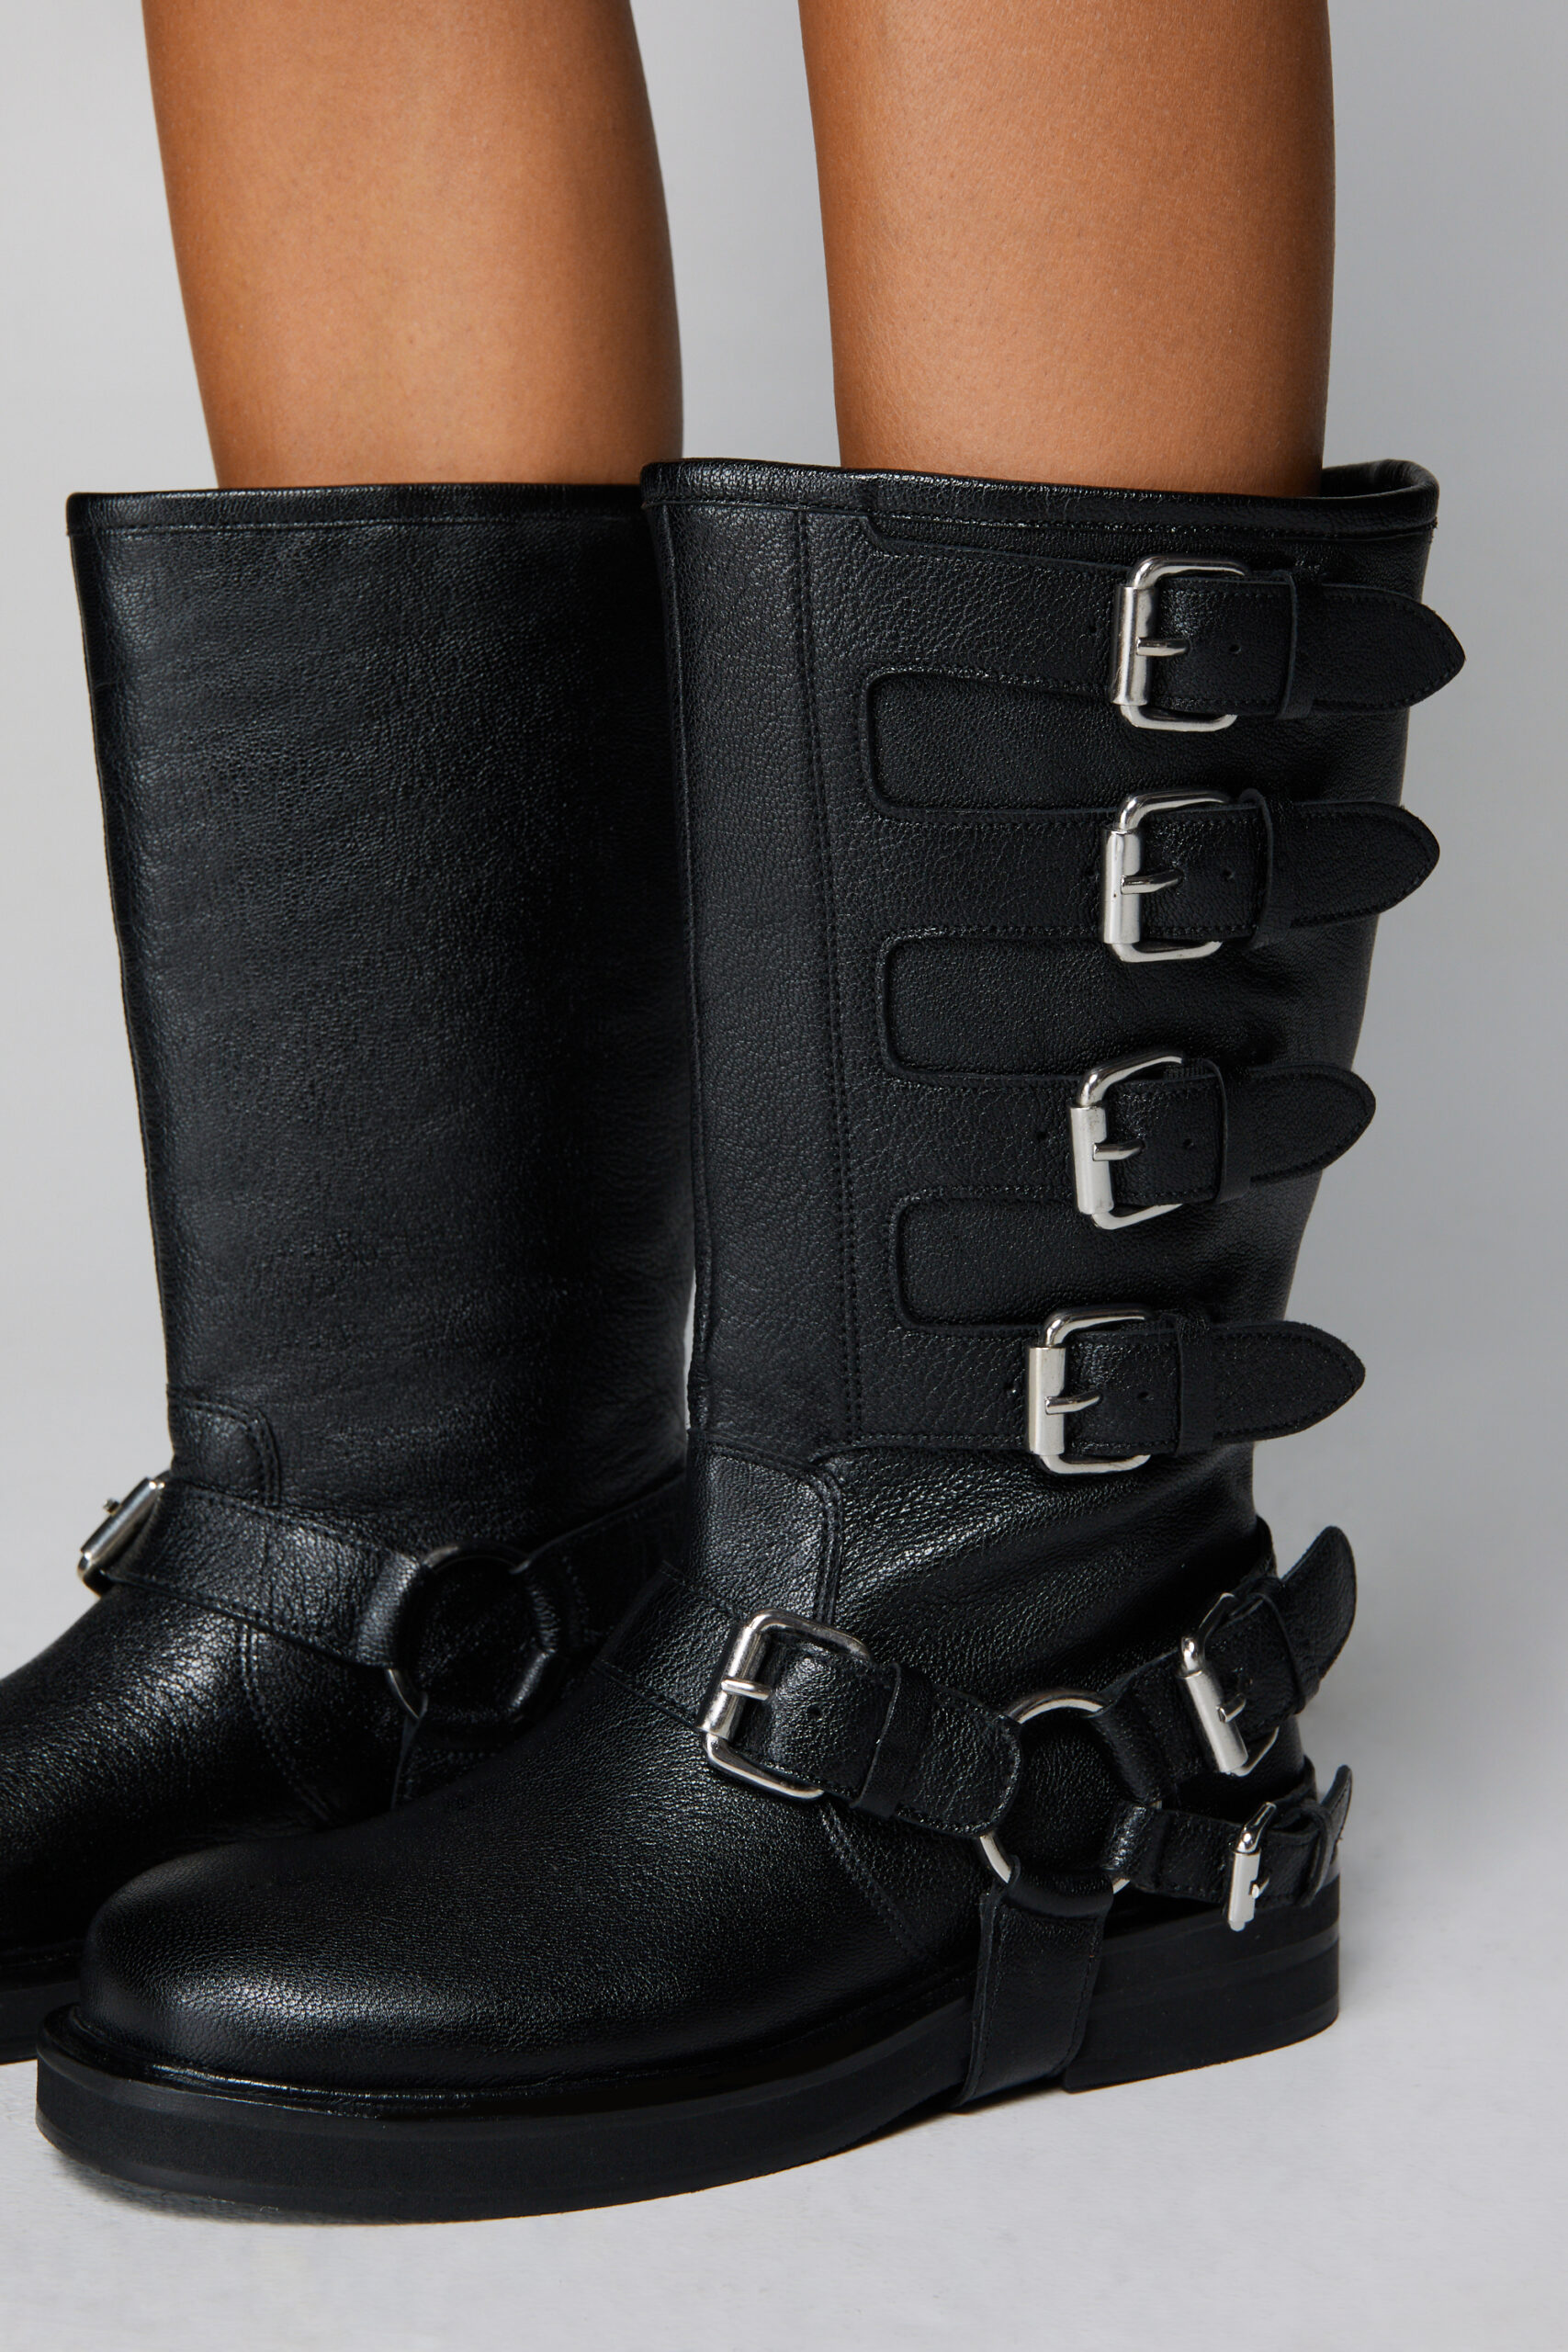 Real Leather Multi Buckle Biker Boots